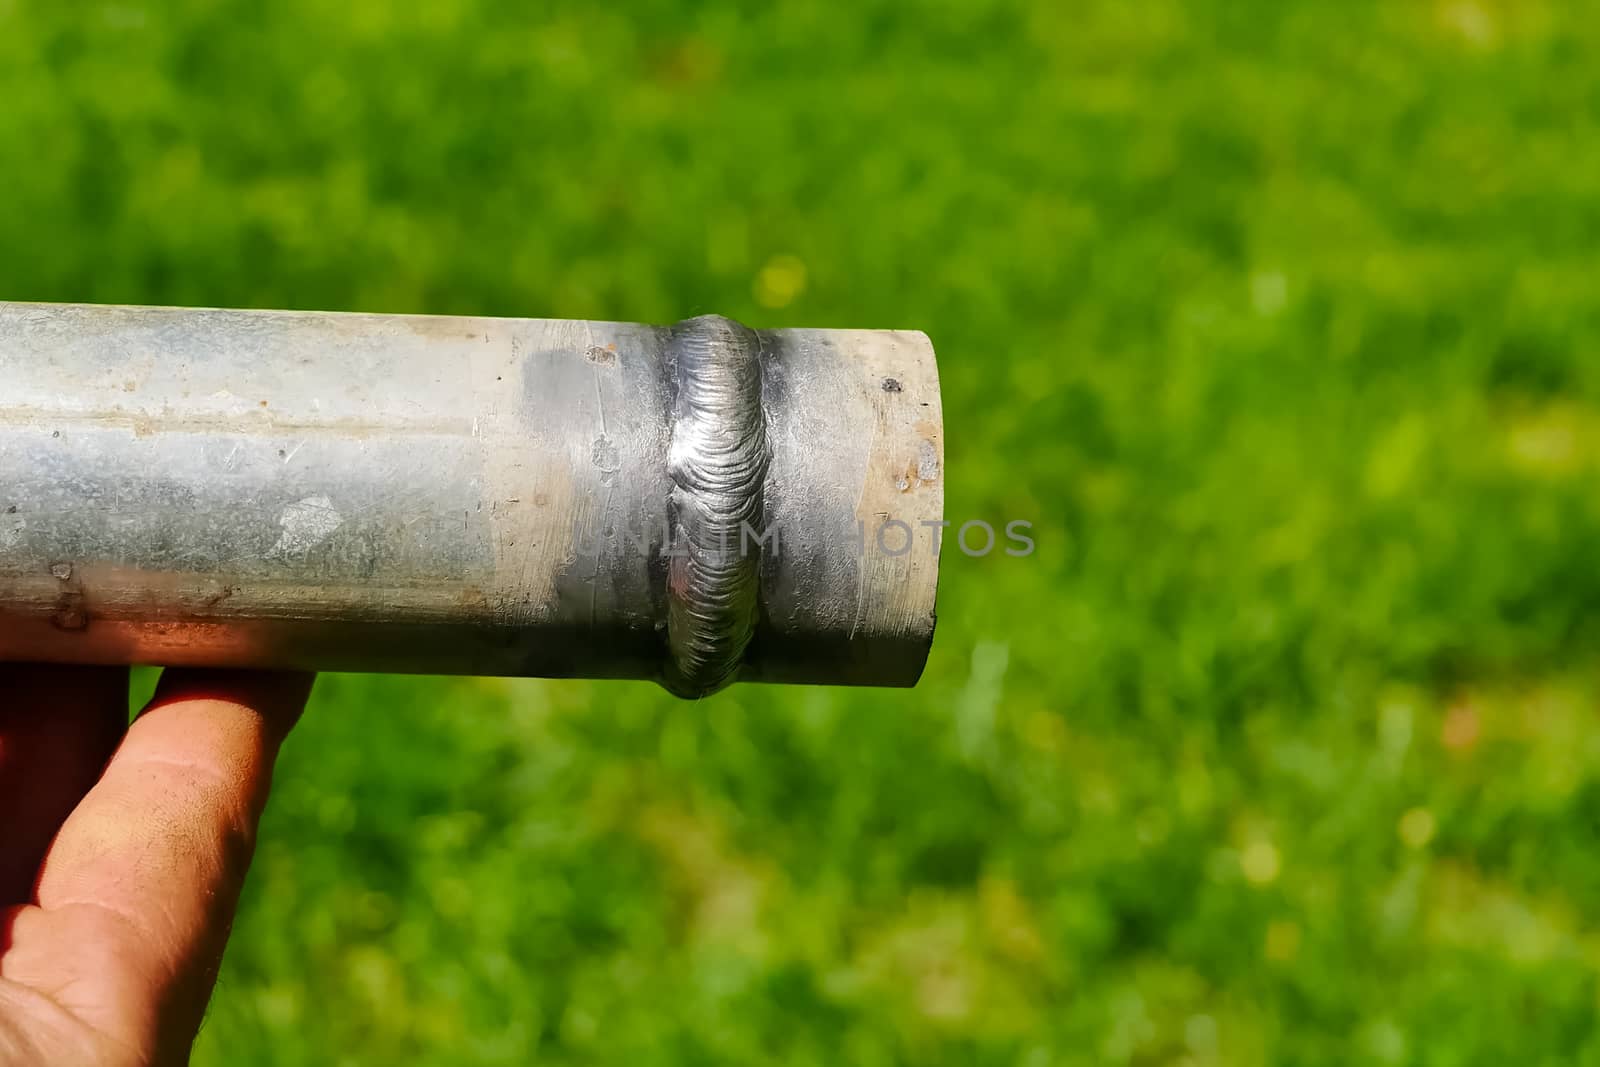 Metal pipe with a welded seam In the hand of a welder's man